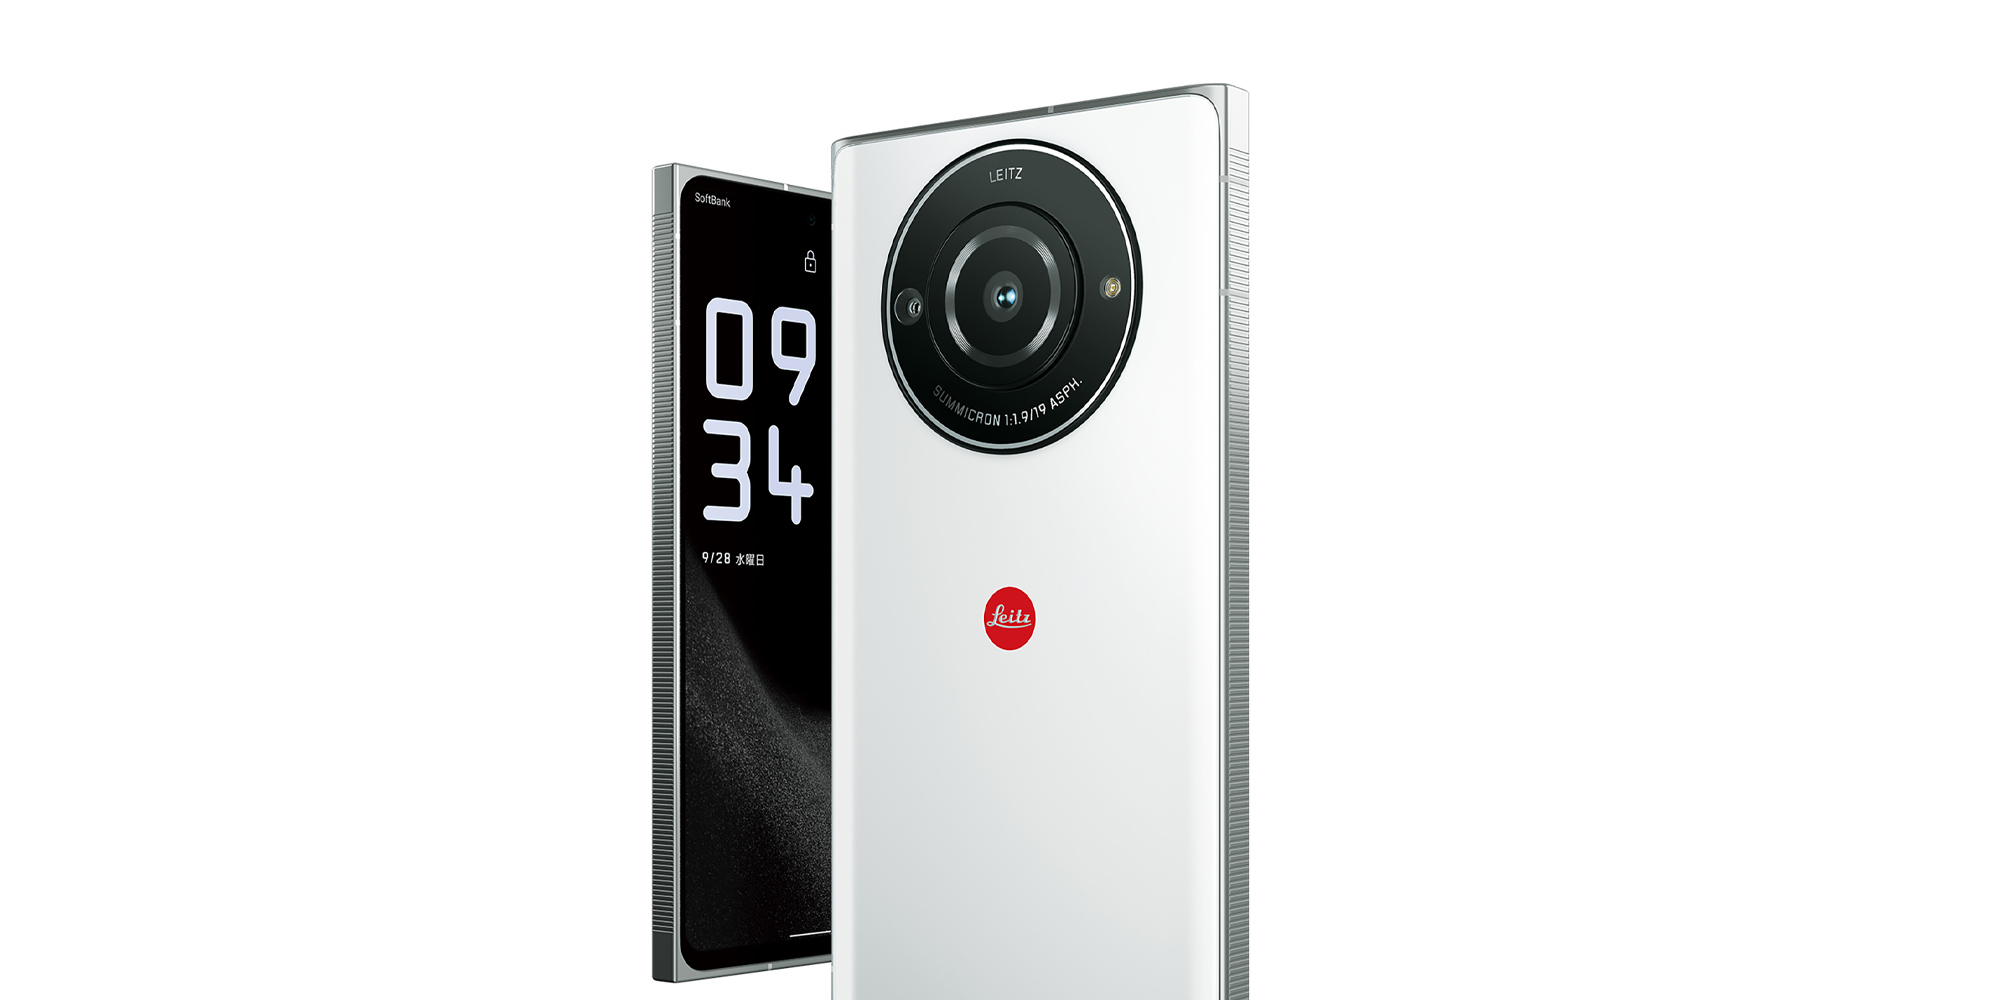 Leica Leitz Phone 2 goes official in Japan w/ 47.2MP 1-inch sensor